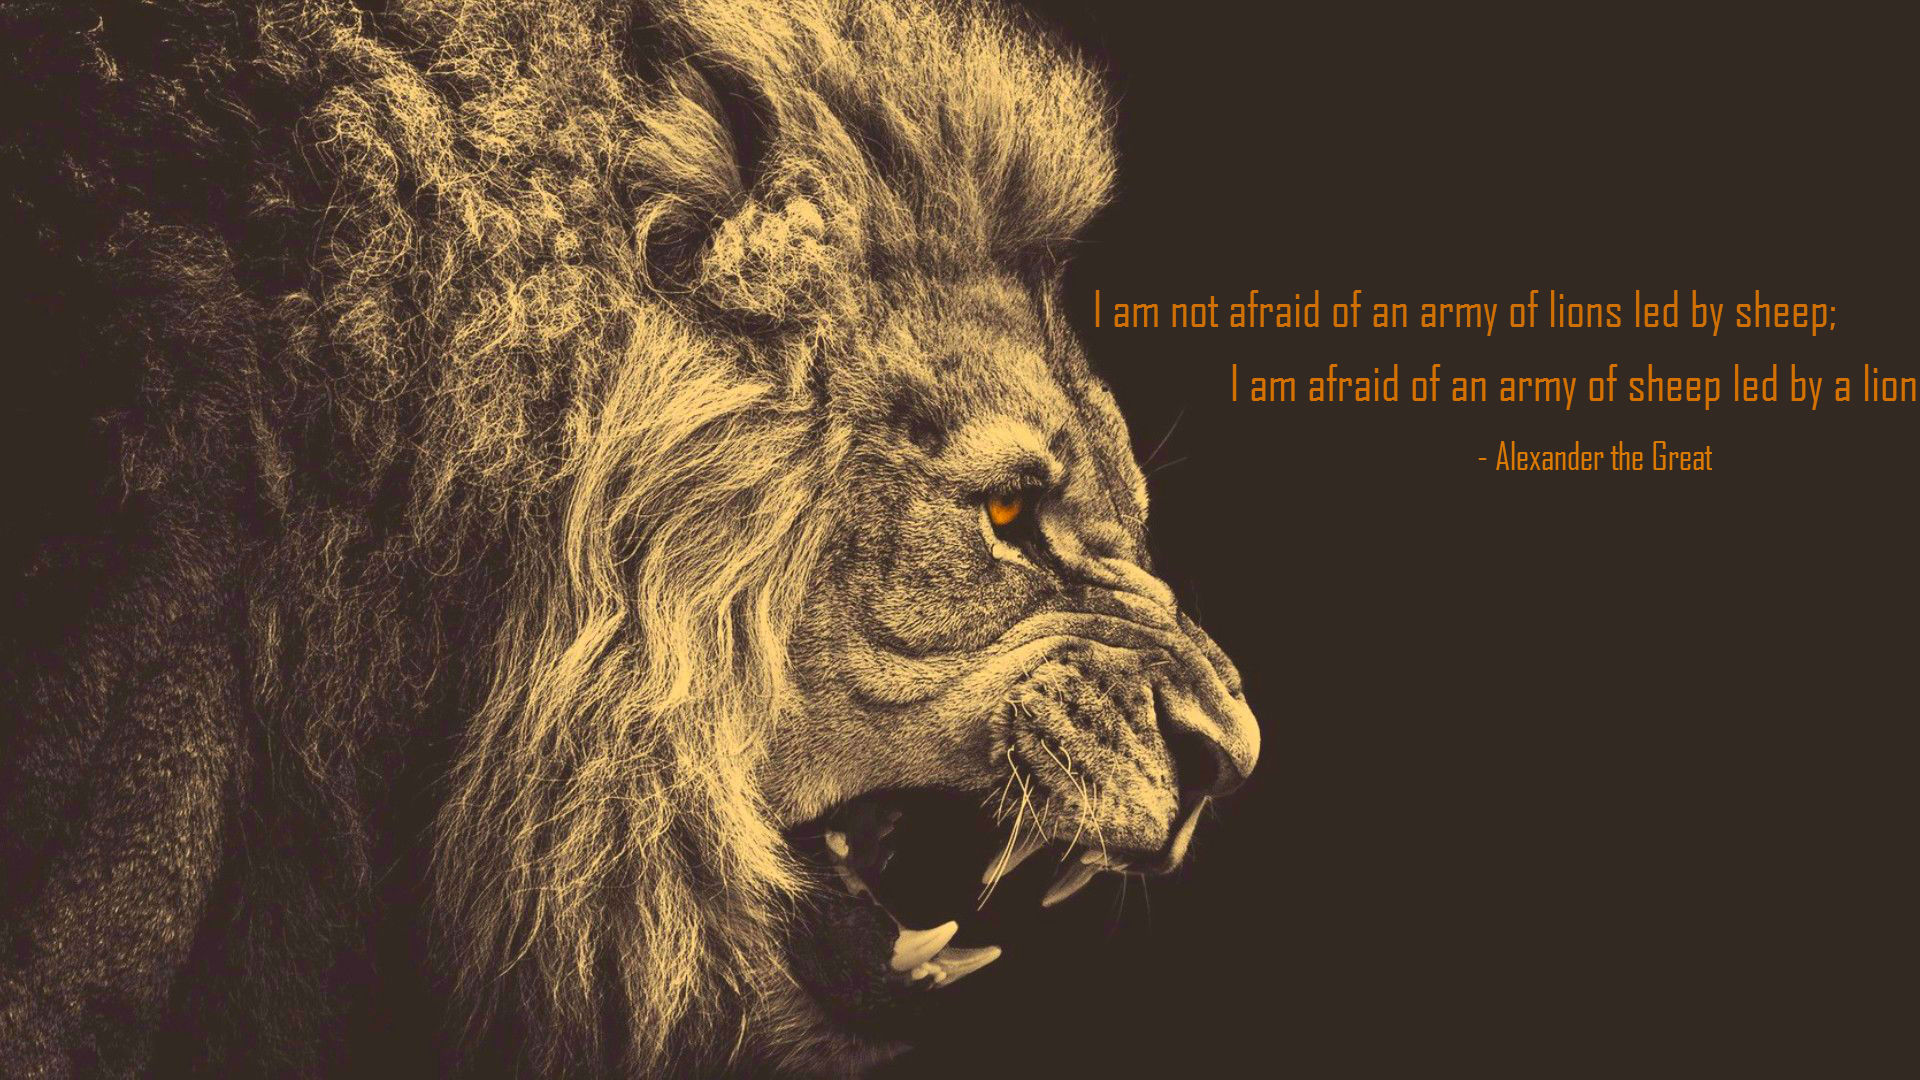 I M Not Afraid Of An Army Of Lions - HD Wallpaper 